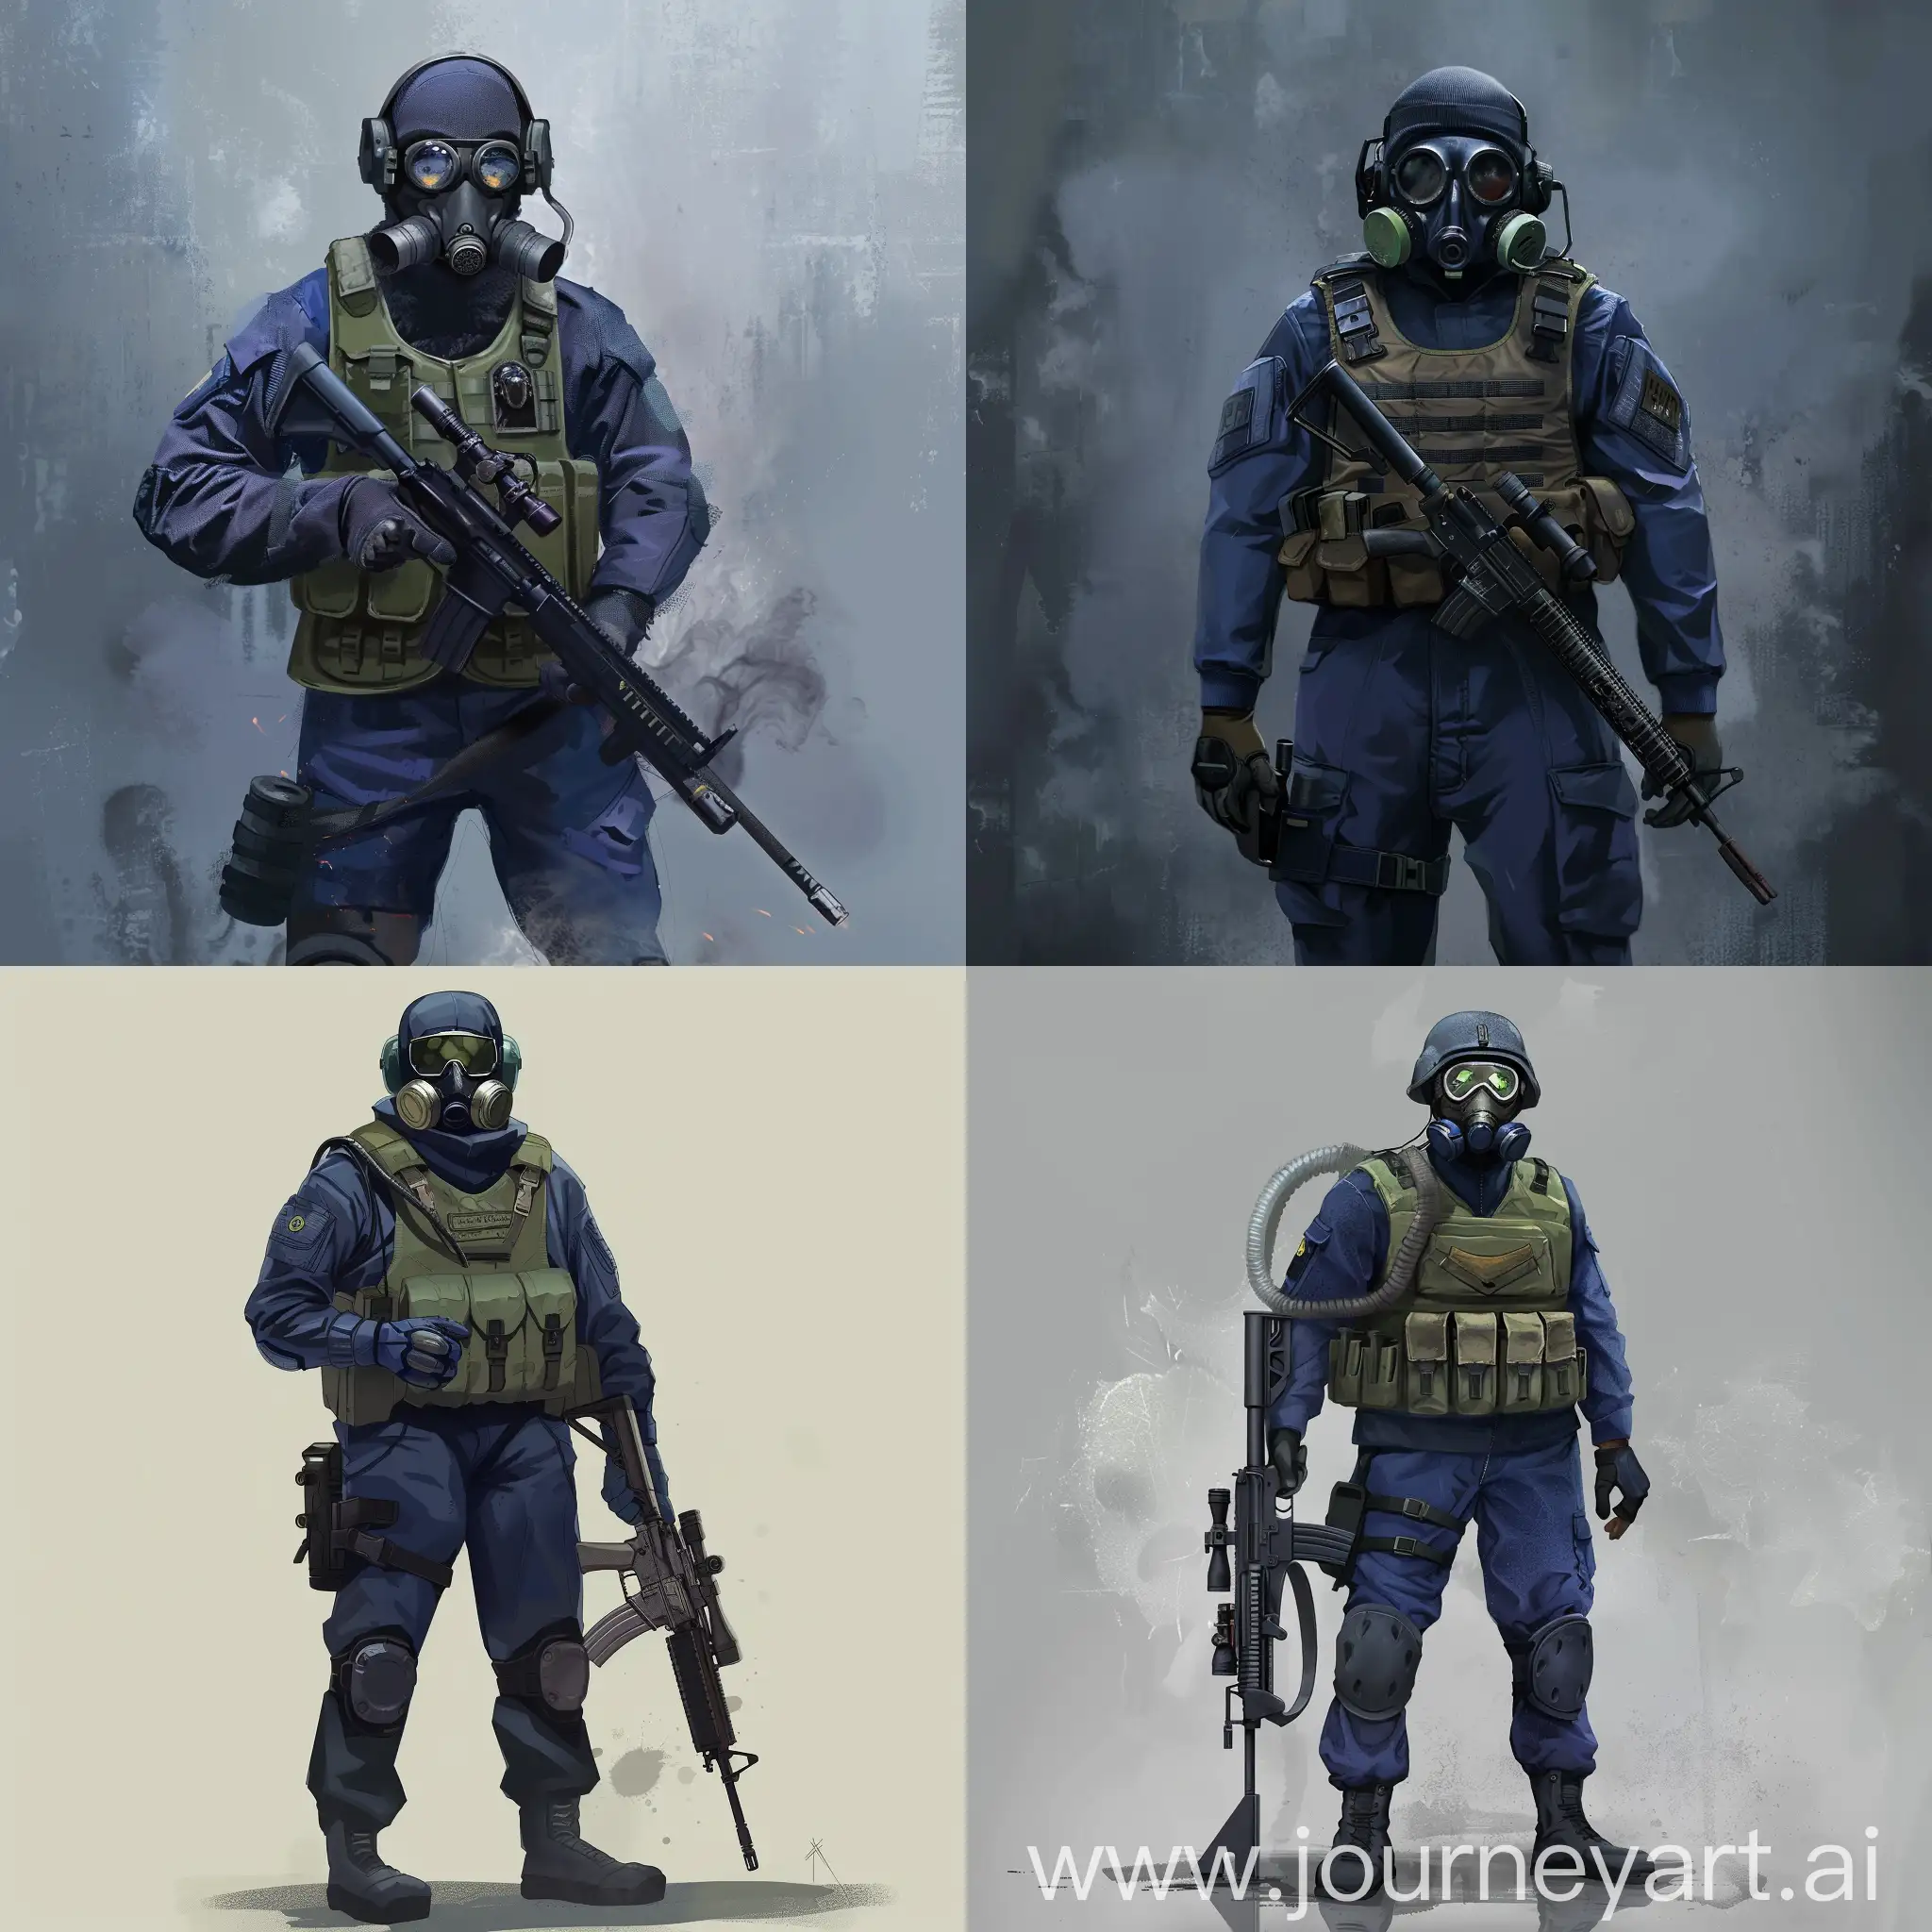 Concept art character, gasmask, military vest, dark blue military jumpsuit, sniper rifle in the hands.